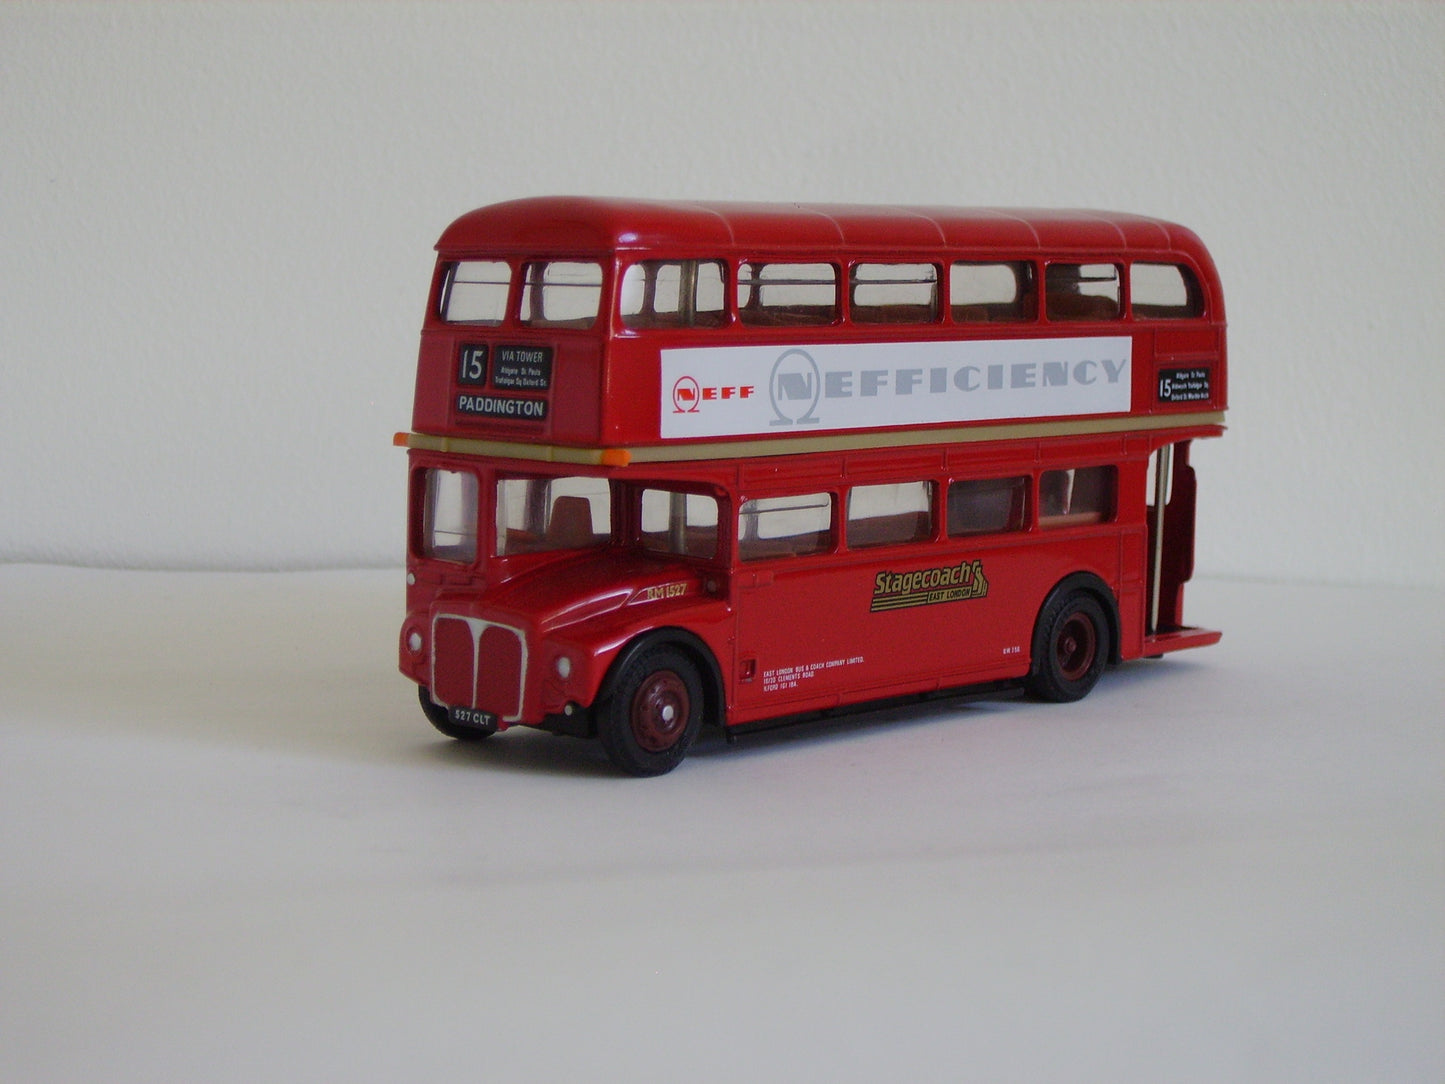 15617 Routemaster "Stagecoach" East London